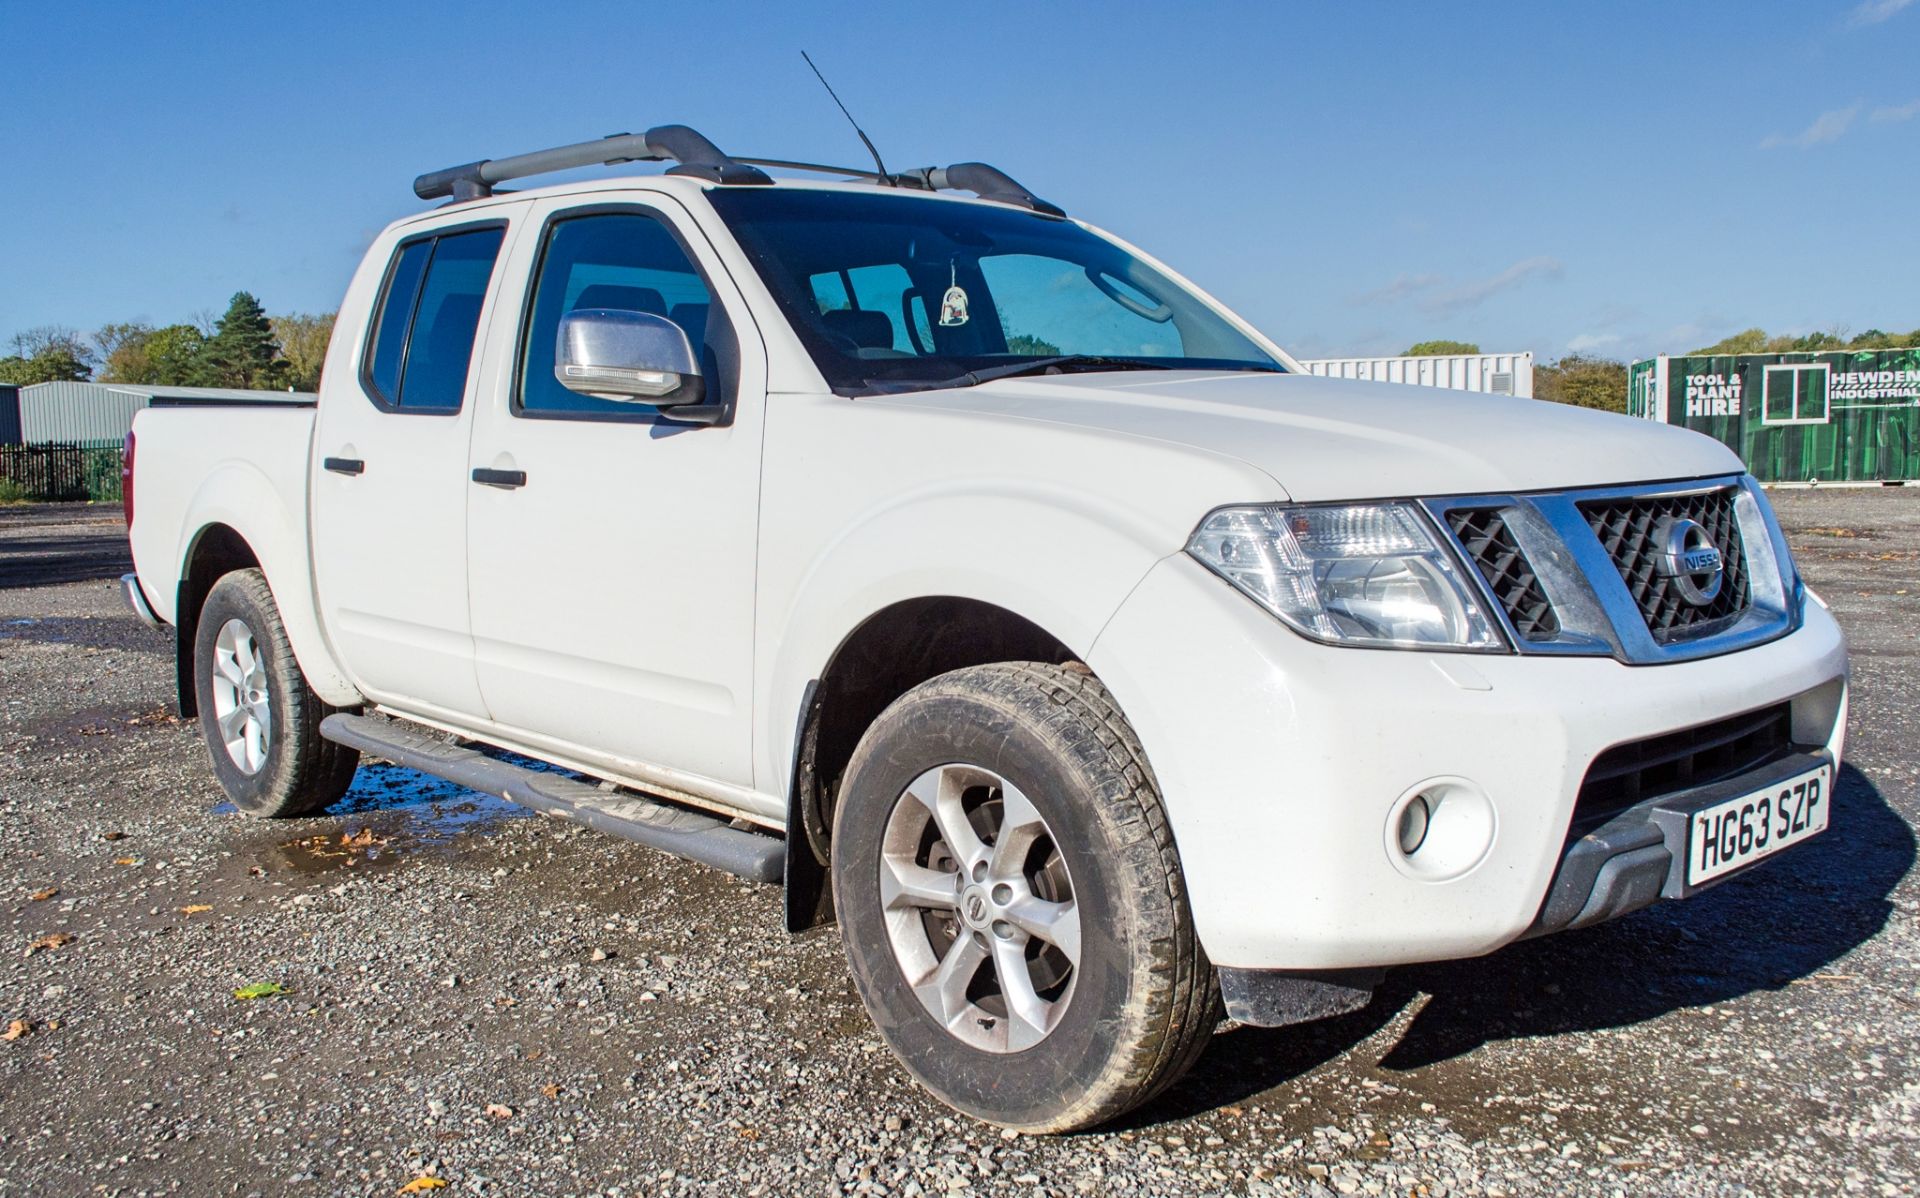 Nissan Navara Tekna DCi 2.5 diesel auto double cab pick up Registration Number: HG63 SZP Date of - Image 2 of 30